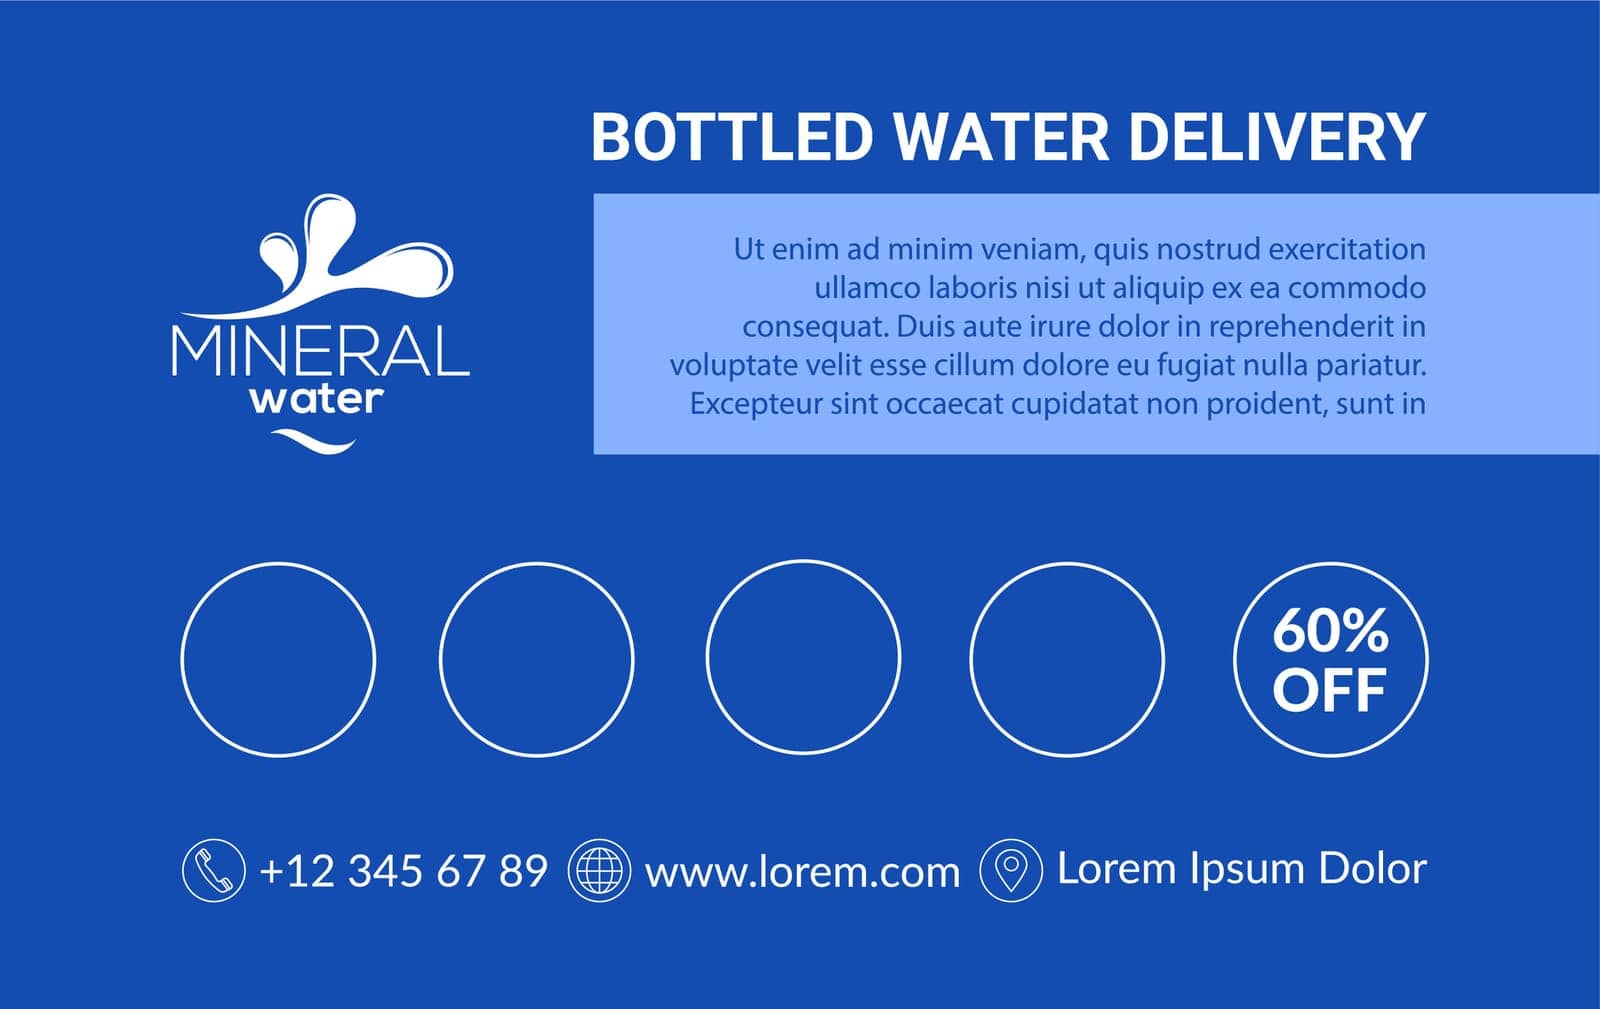 Bottled water delivery servce from shop vector by Sonulkaster